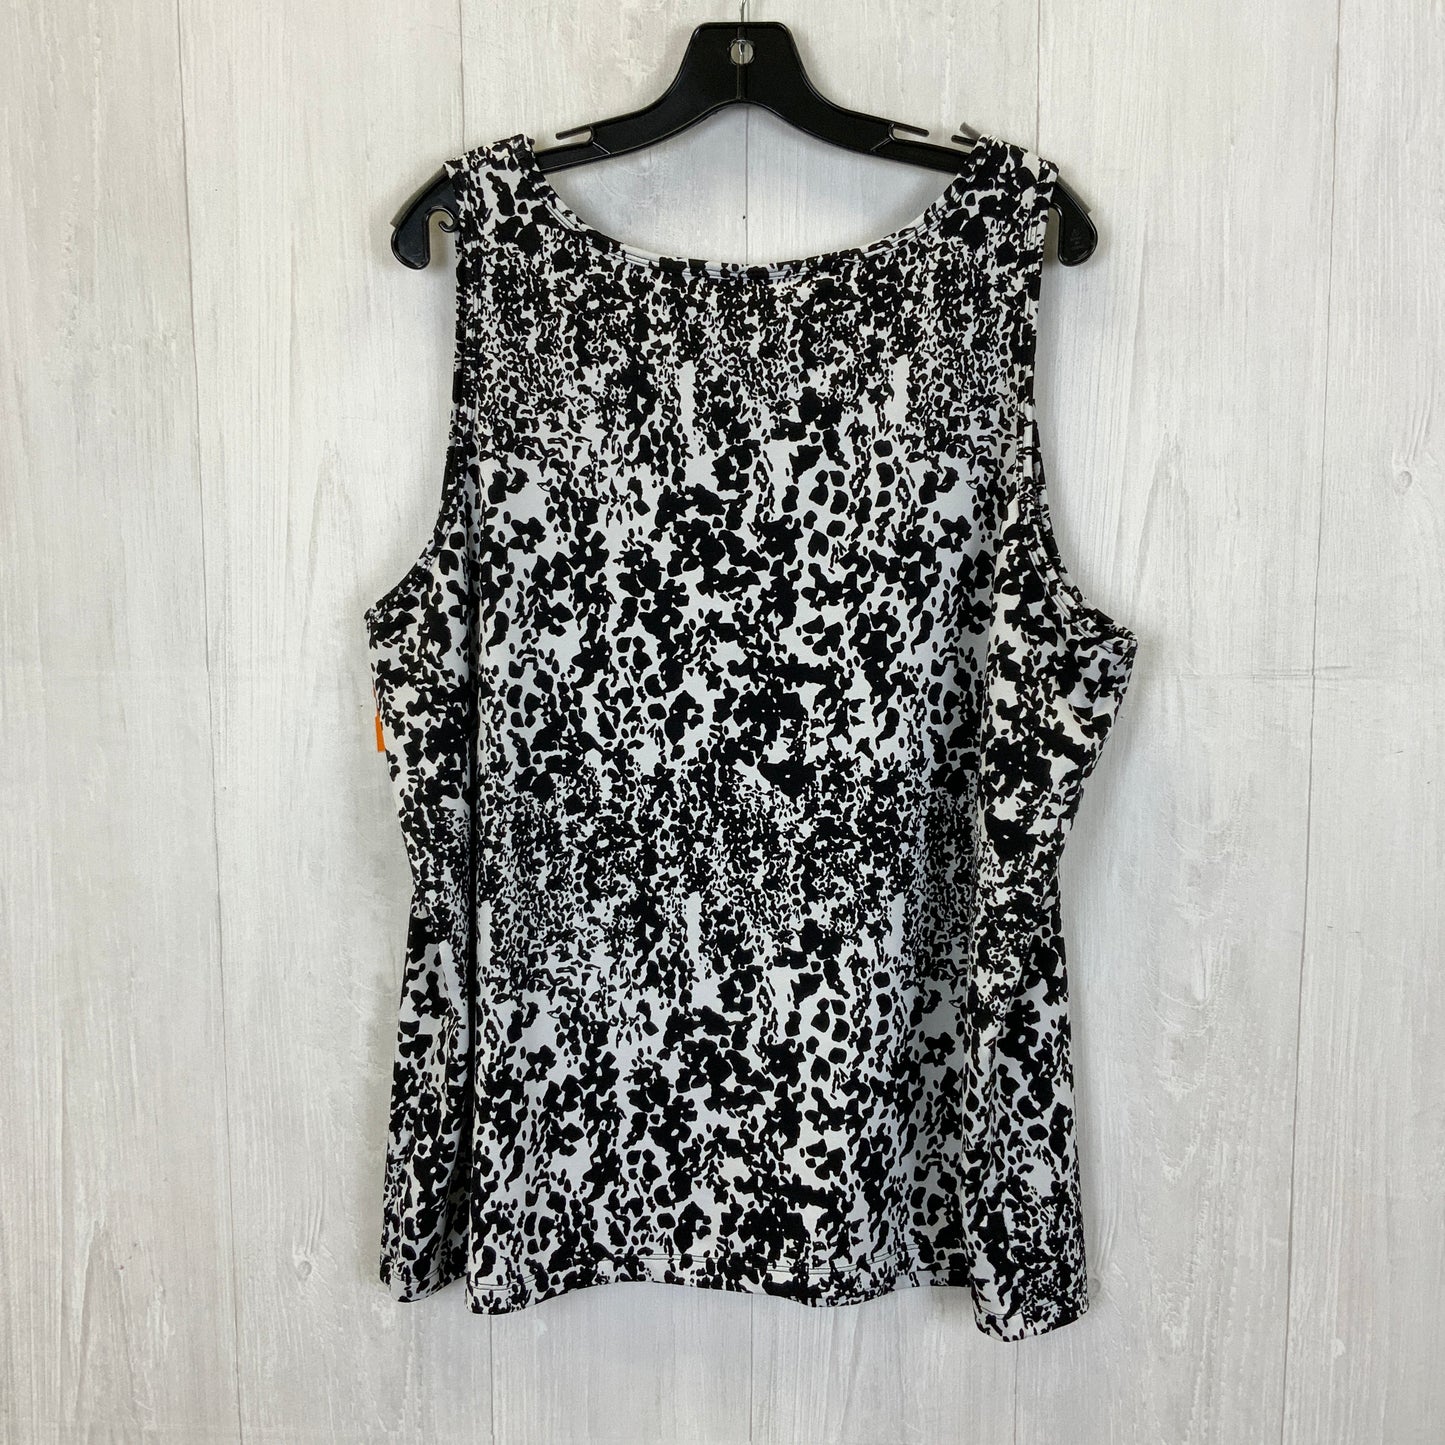 Tank Top By Maggie Barnes  Size: 3x